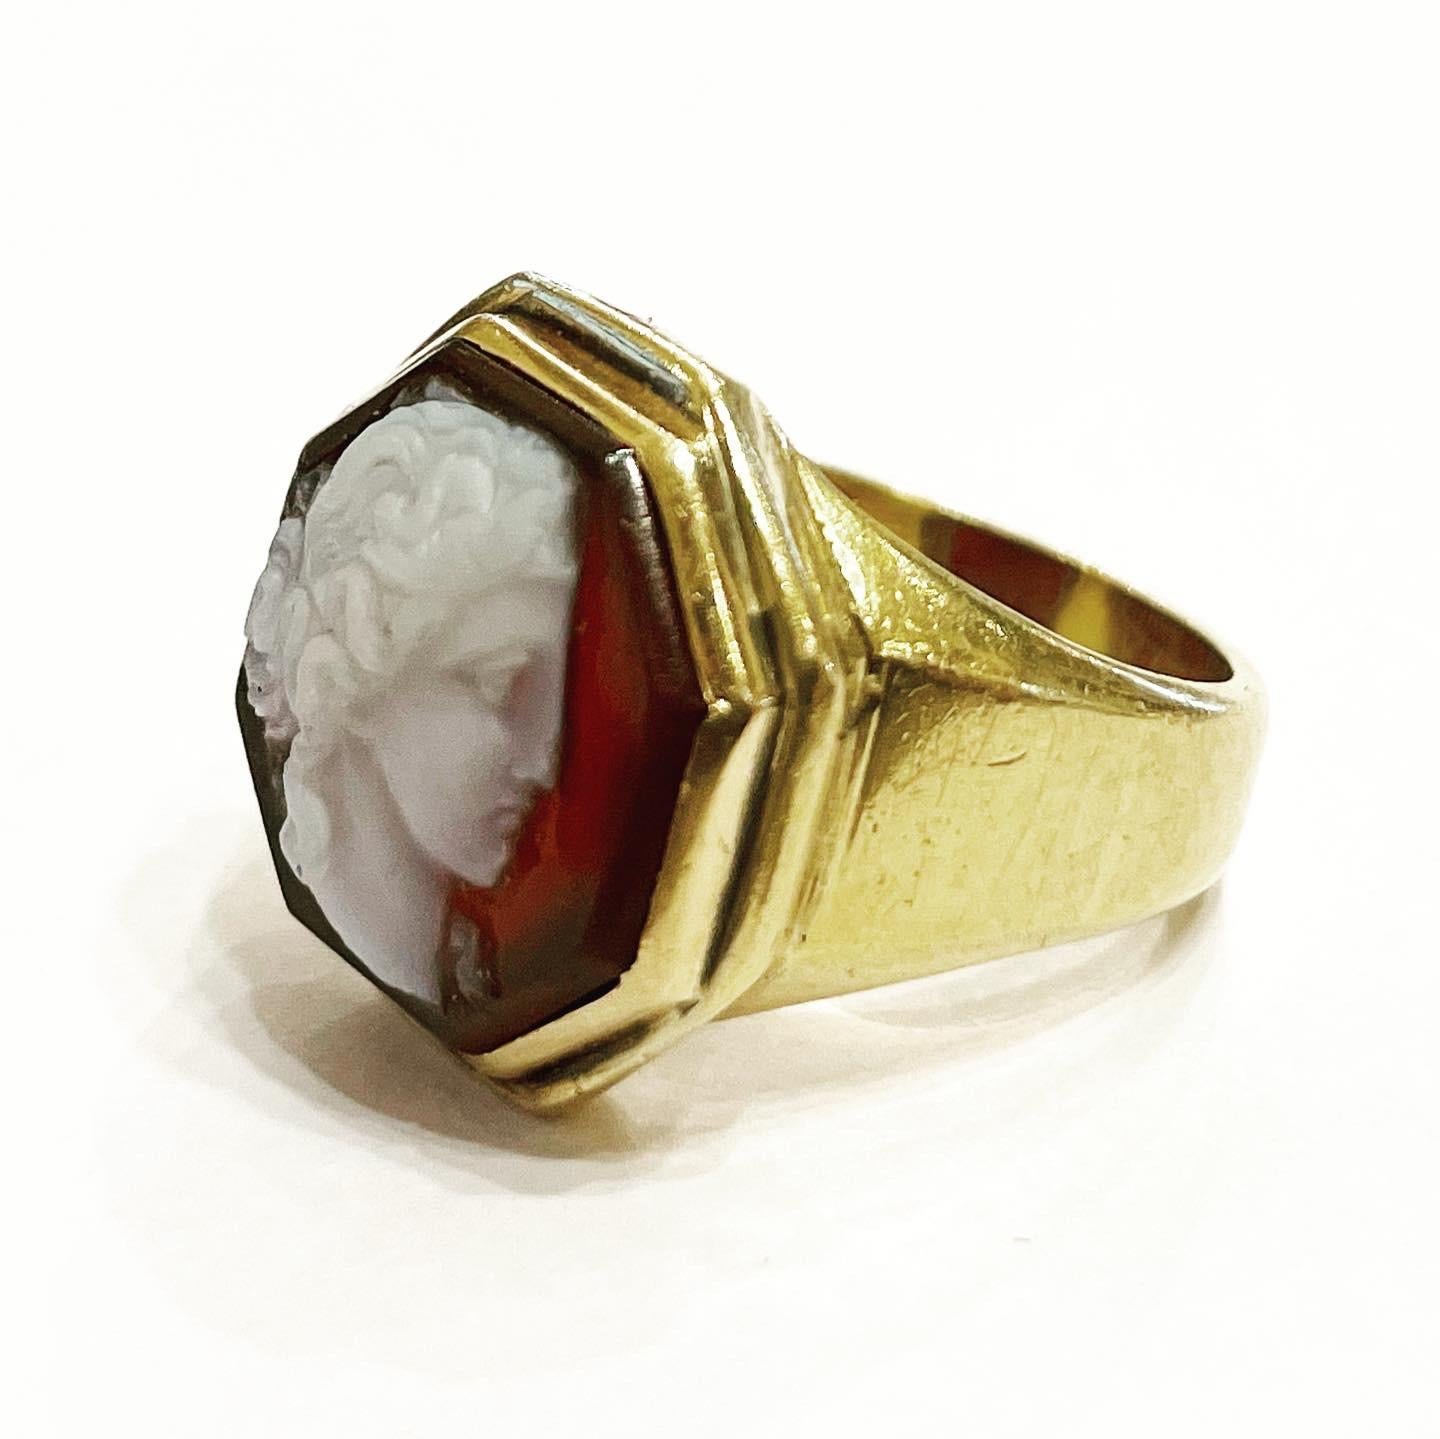 1930's hexagonal female profile sardonyx cameo 18k yellow gold signet ring.

Total weight of the jewel: 8.87 g.
US Ring Size : 4.5.
It can be slightly  sized.

FREE SHIPPING AND RESIZING.
RETURNS ACCEPTED (3 days).
A gorgeous design, it could be a